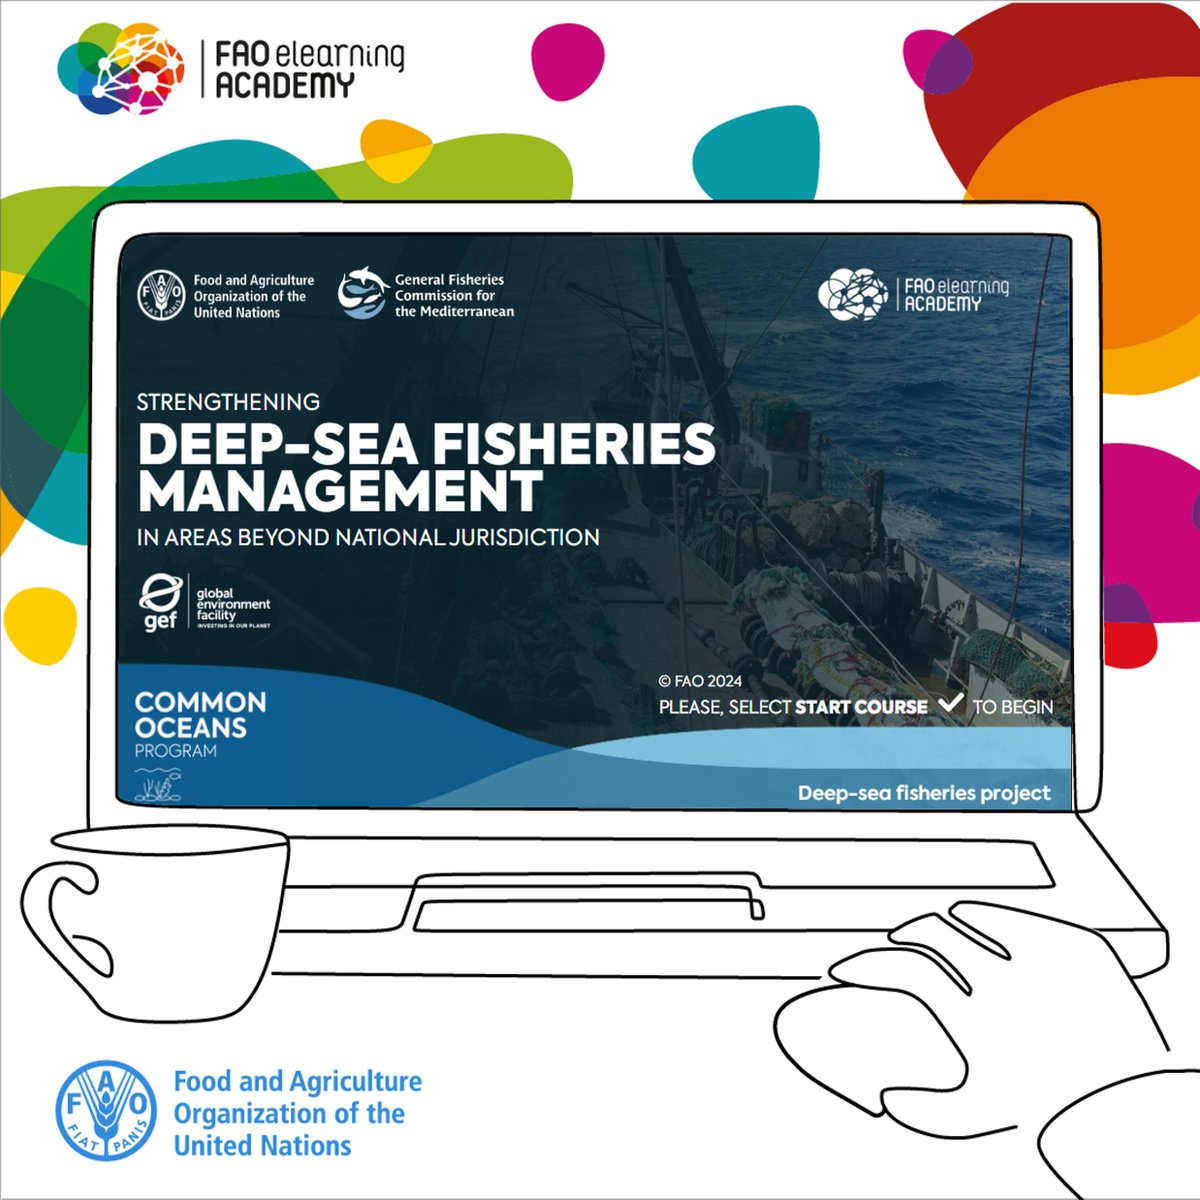 This @FAOFish #elearning course offers essential know-how for sustainably managing deep-sea #fisheries in areas beyond national jurisdiction, #ABNJ. From policy to operations, it covers all for responsible stewardship. Enroll now 👉 bit.ly/3QzyQ37 #BlueTransformation